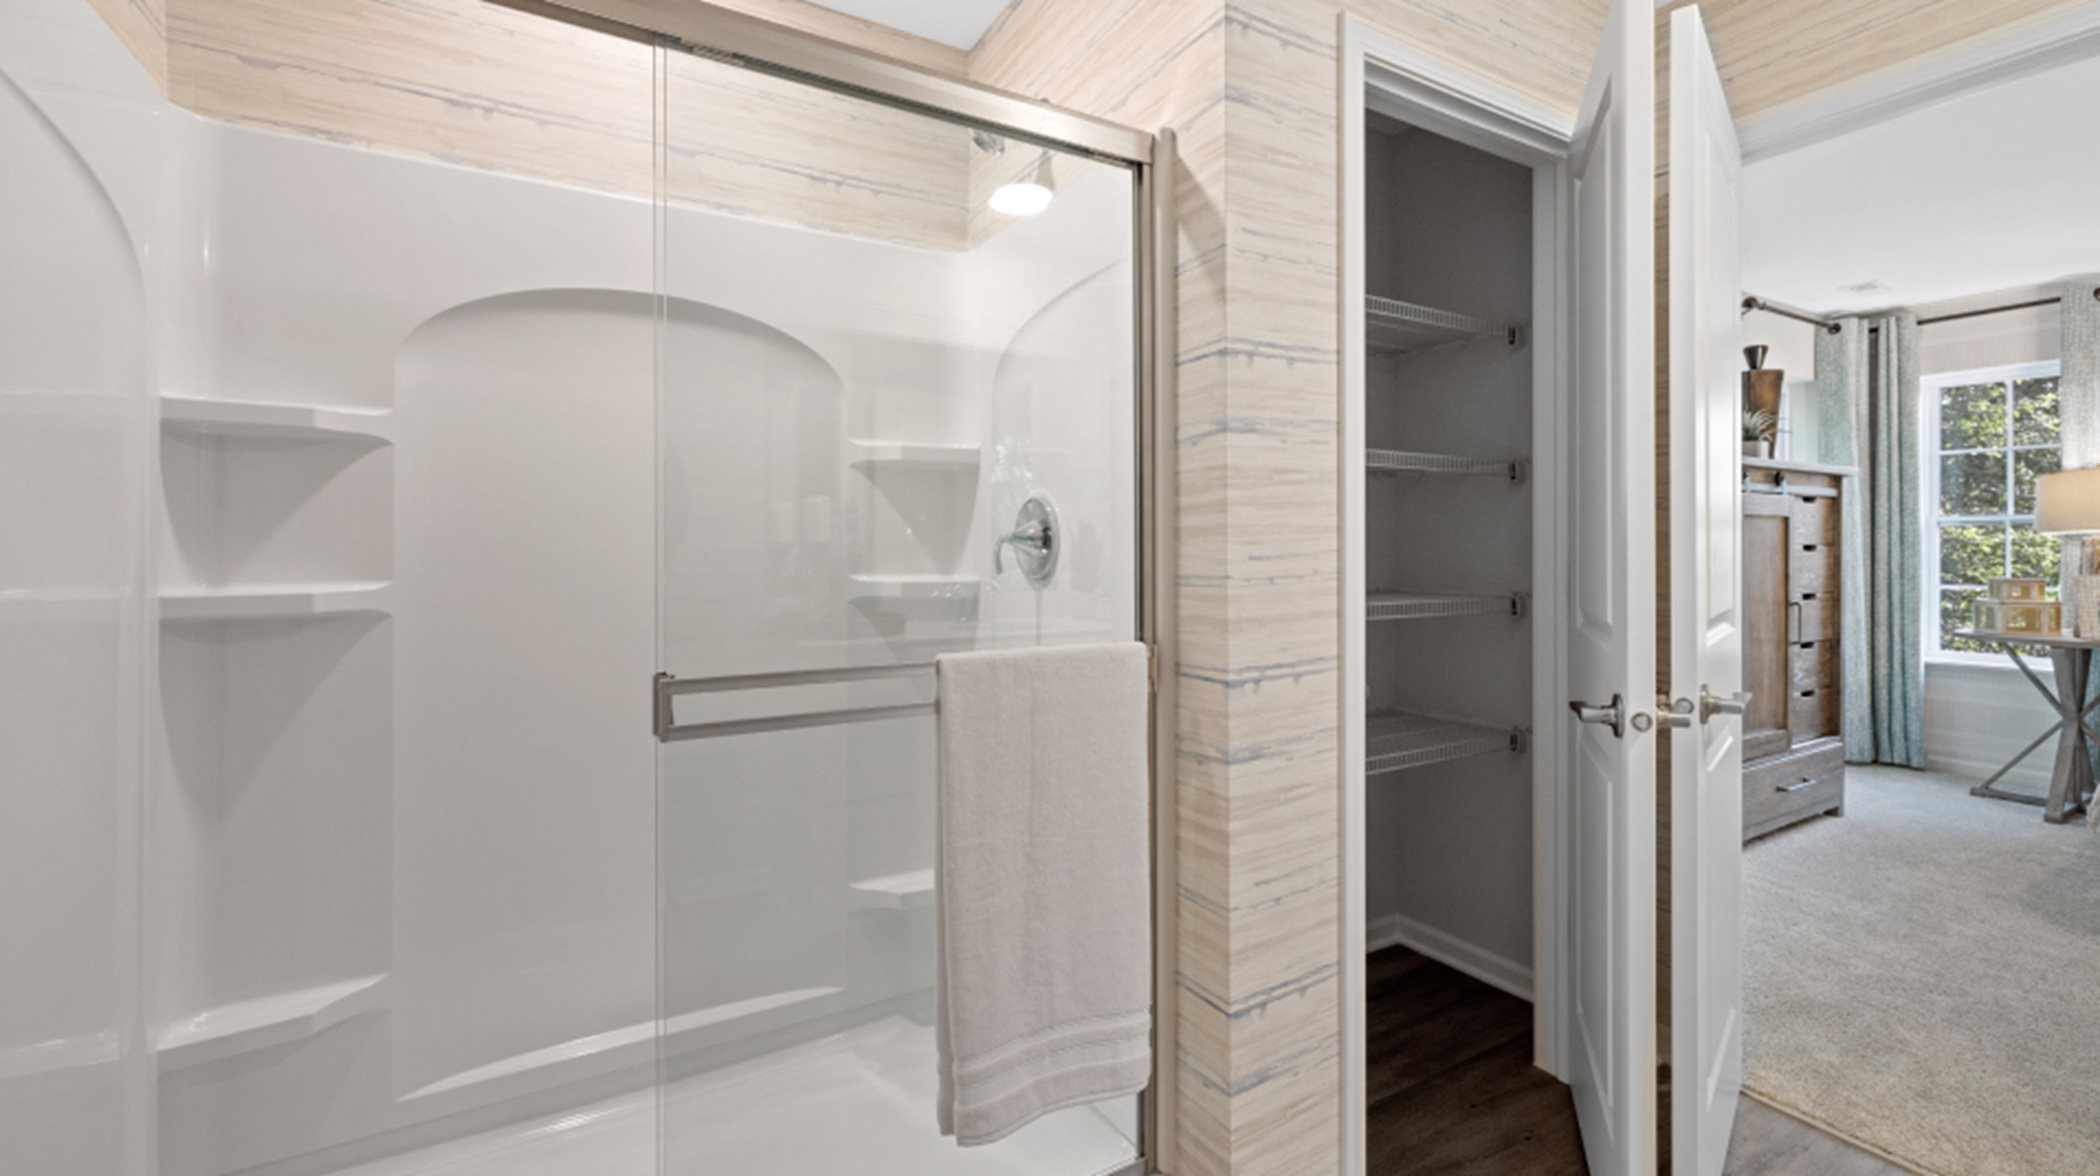 Darcy Fiberglass shower with clear glass door, brushed nickel trim and built-in shelving in owner's suite bathroom